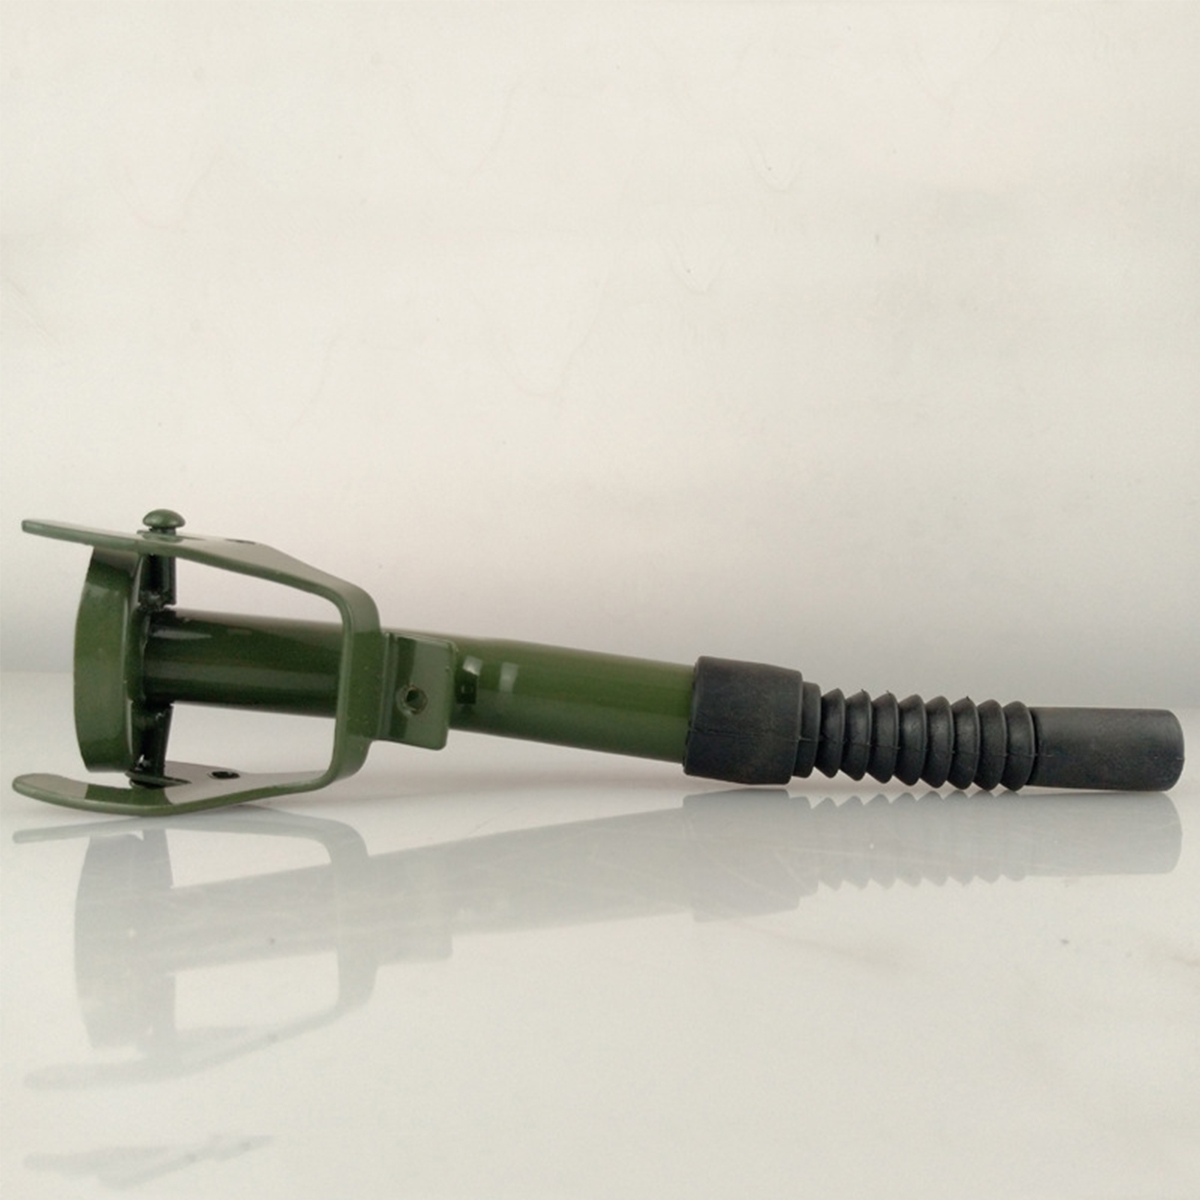 Black-Metal-Jerry-Can-Gas-Canister-Rubber-Nozzle-Spout-Military-Style-Clamp-20L-1600813-4